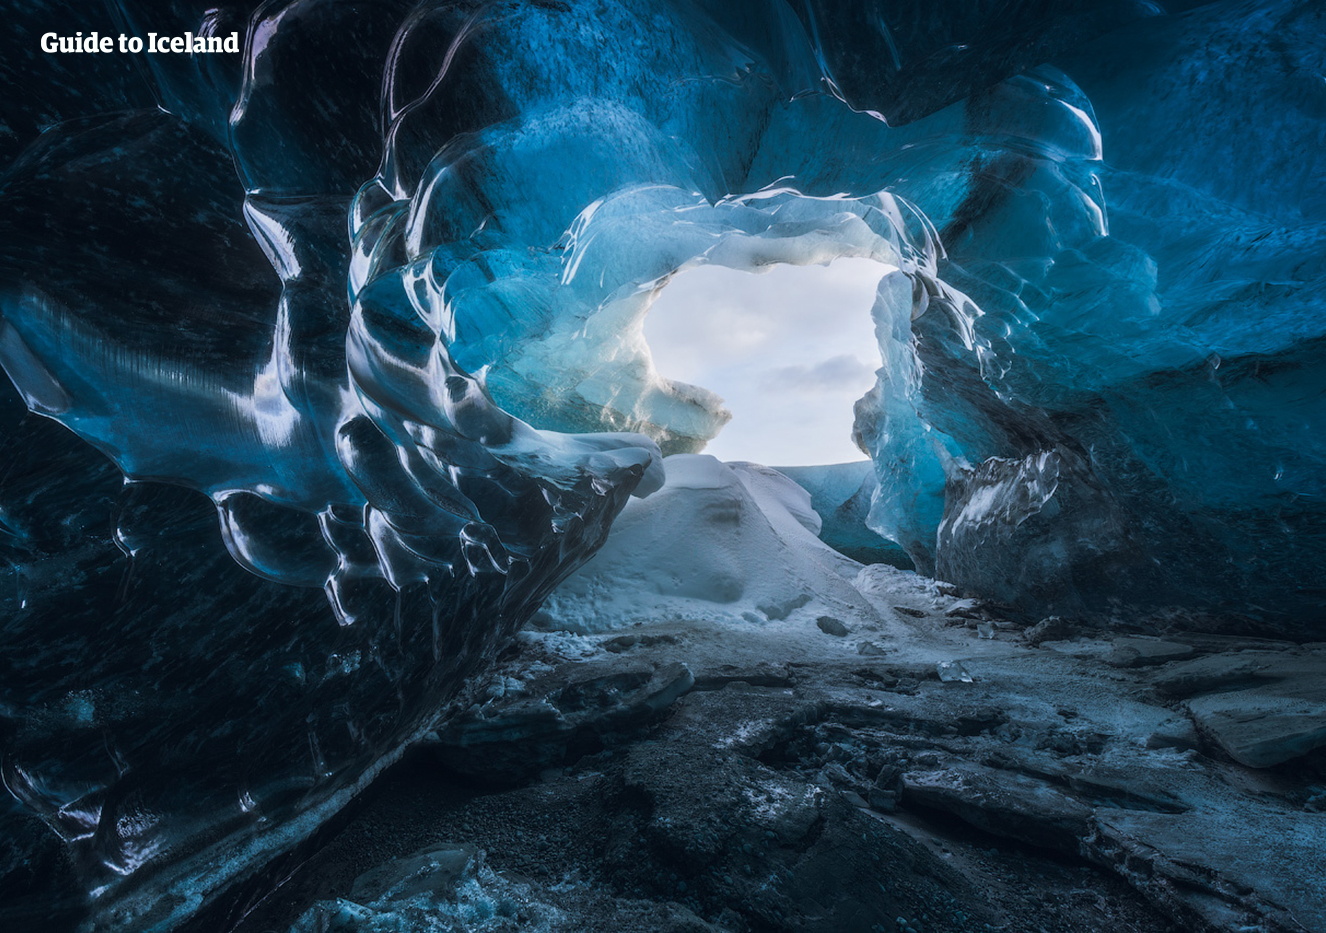 One of the three awesome attractions of Vatnajökull National Park in winter is its ice caves; the others are Jökulsárlón glacier lagoon and Skaftafell Nature Reserve.